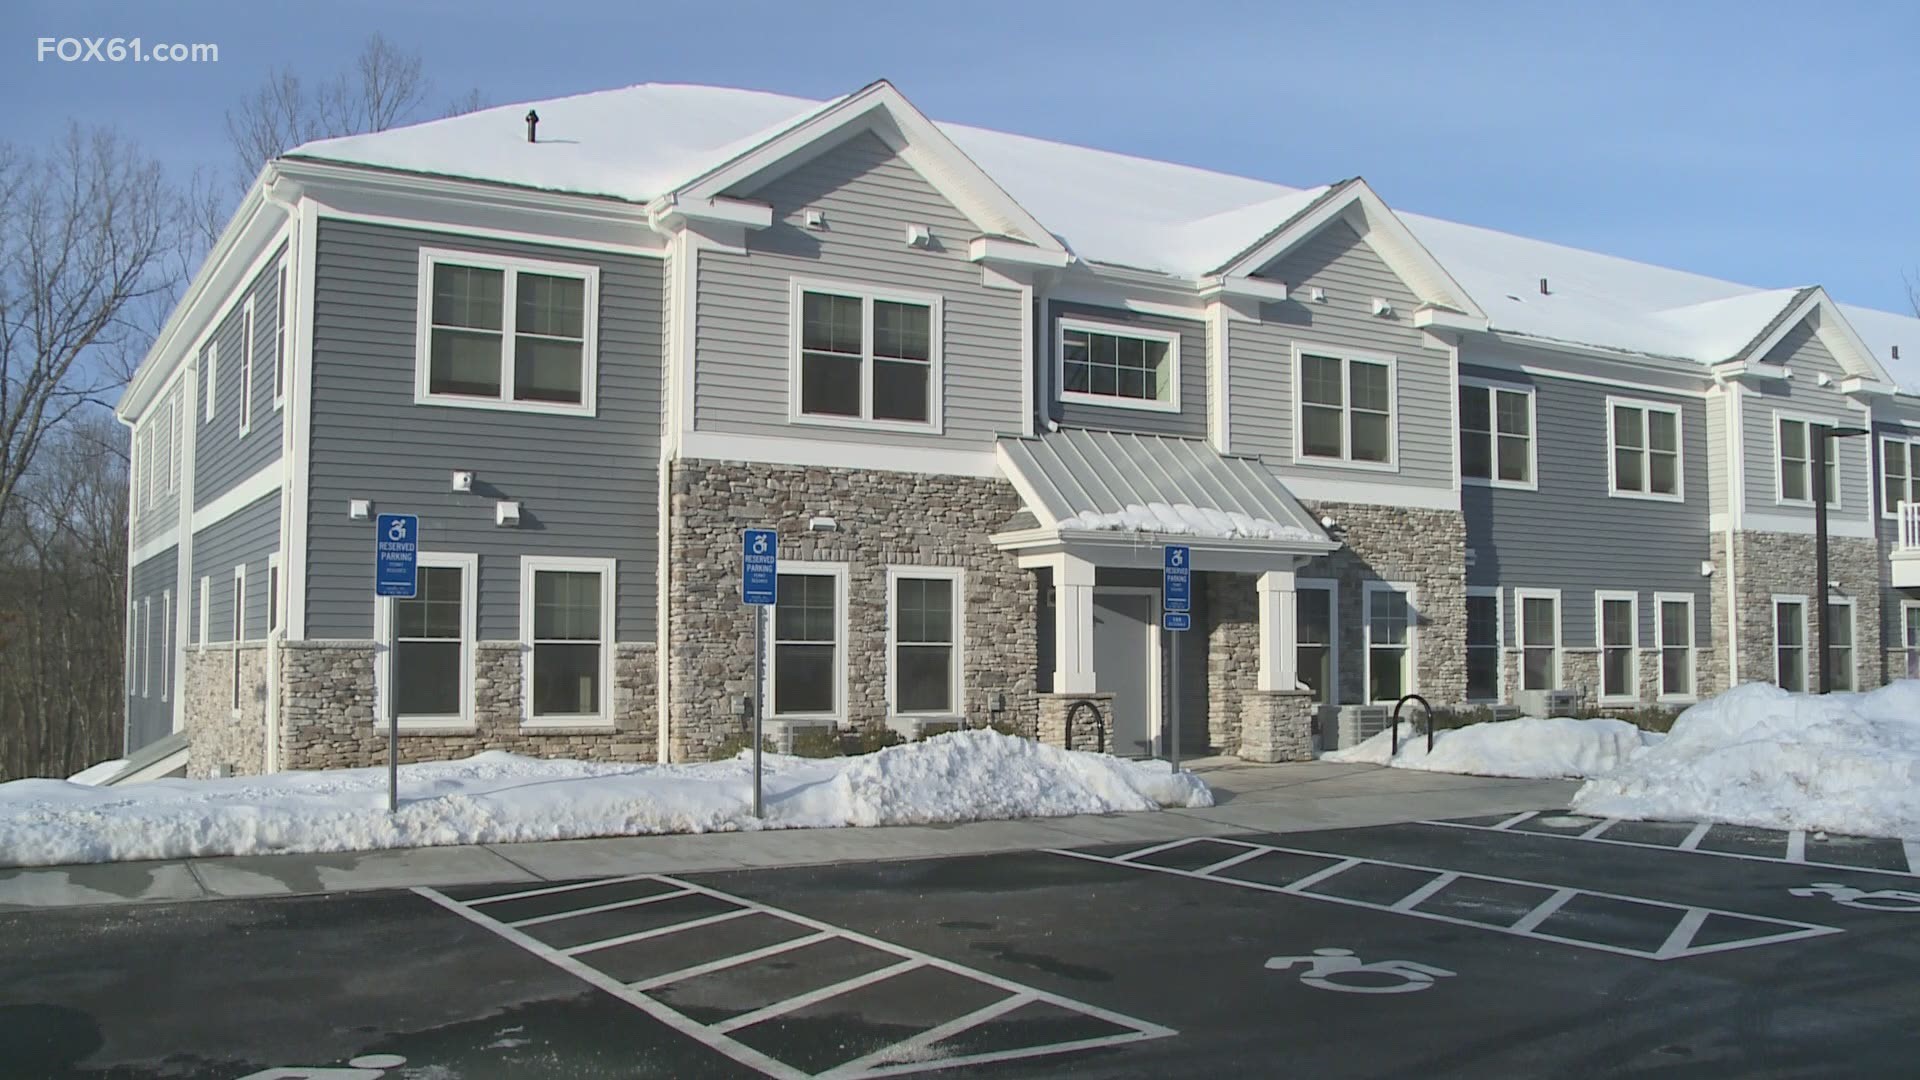 A 40-apartment complex has now opened in Canton, with some living spaces designed for adults with intellectual disabilities.